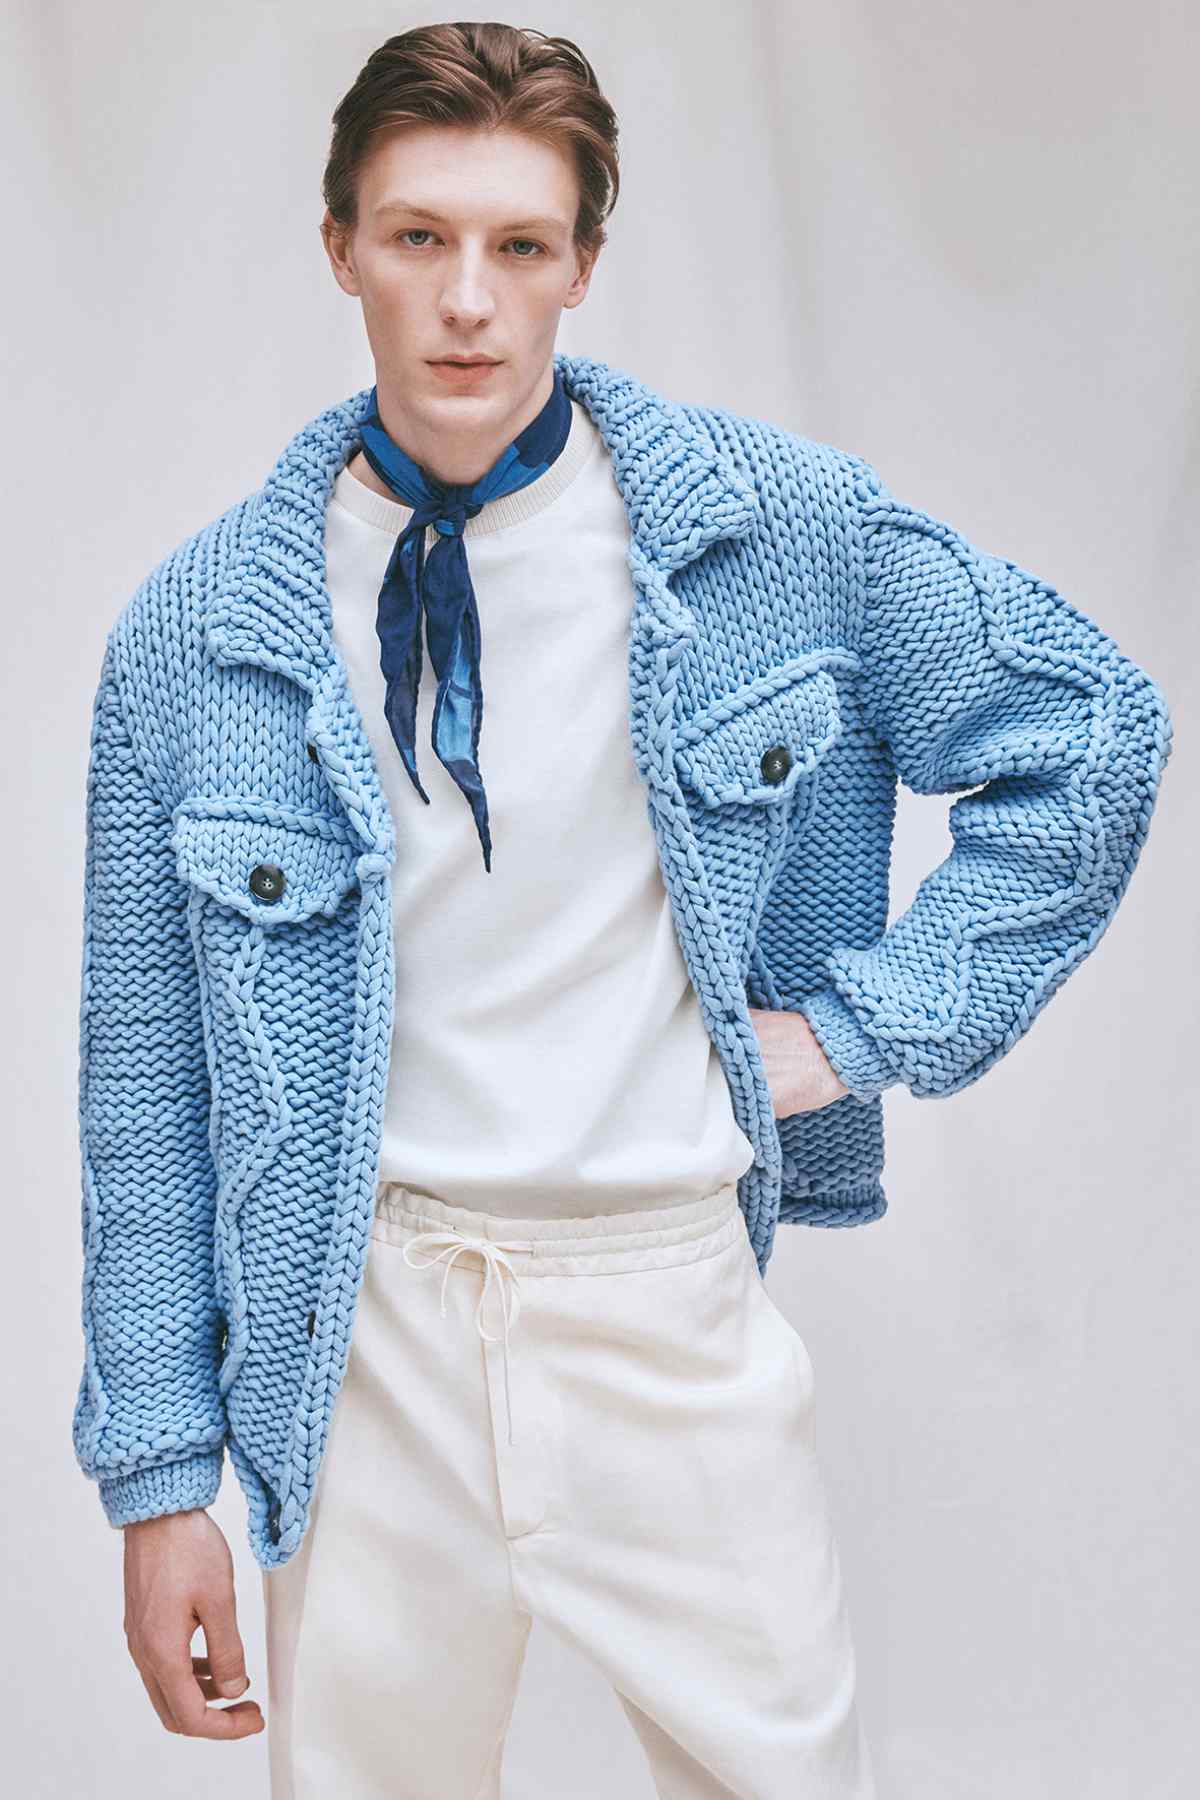 Canali Presents Its New Spring/Summer 2024 Collection: Mediterranean Craft